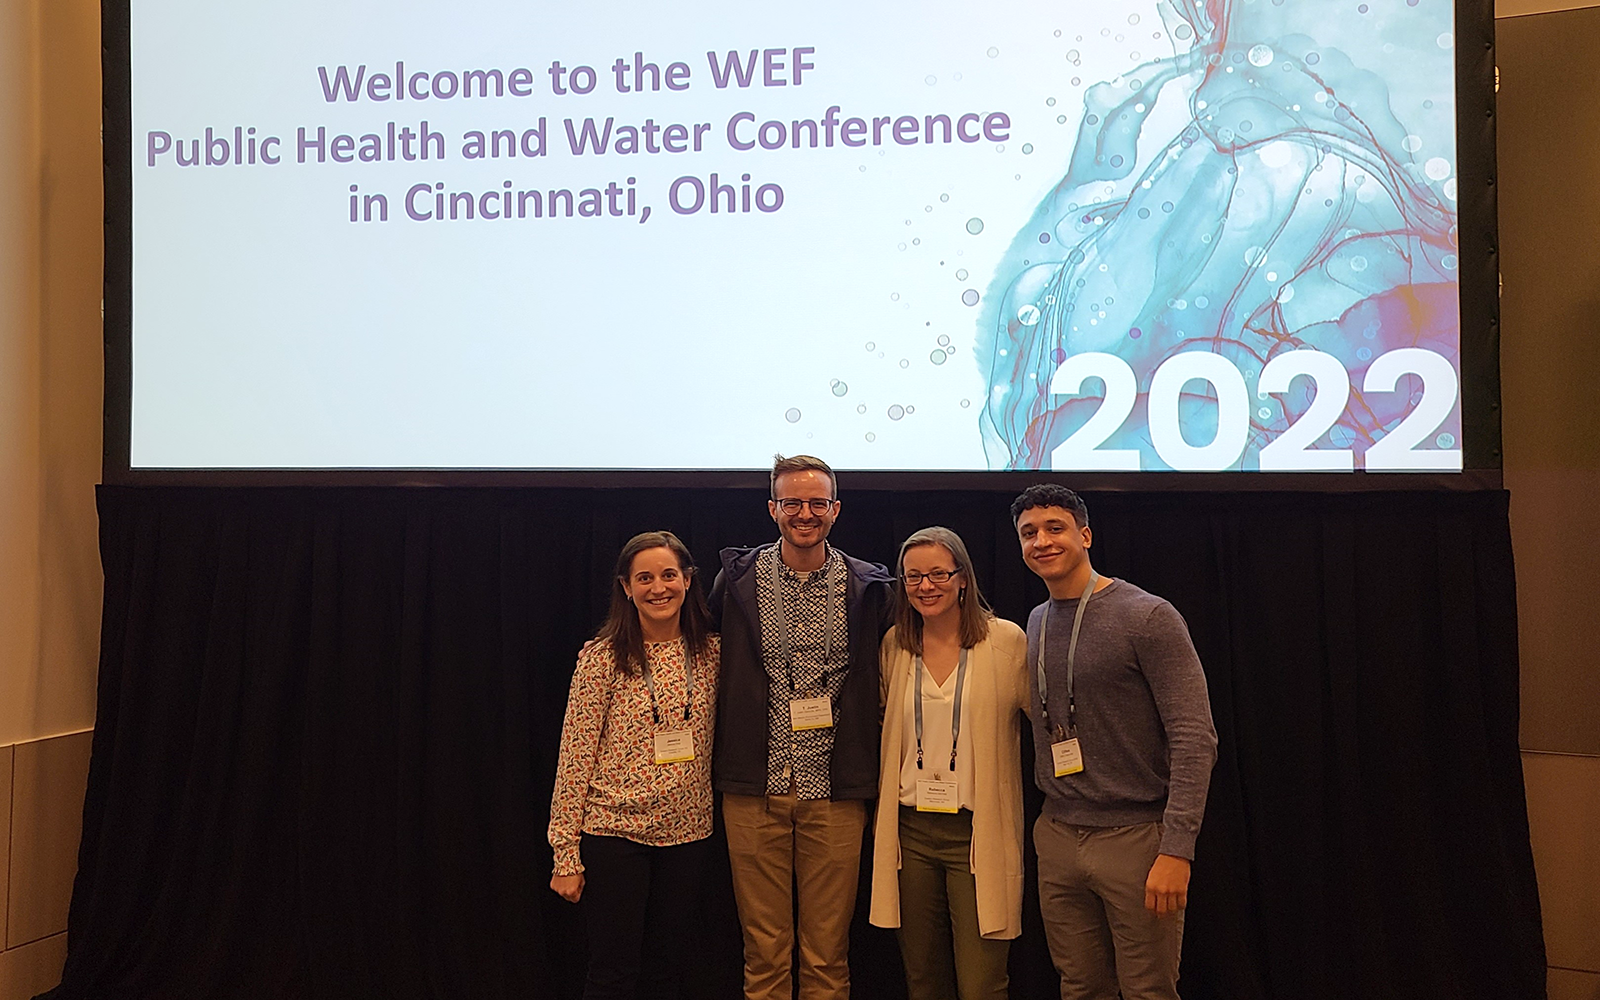 Four people (two men and two women) pose in front of a sign that reads Welcome to the WEF Public Health and Water Conference in Cincinnati, Ohio.